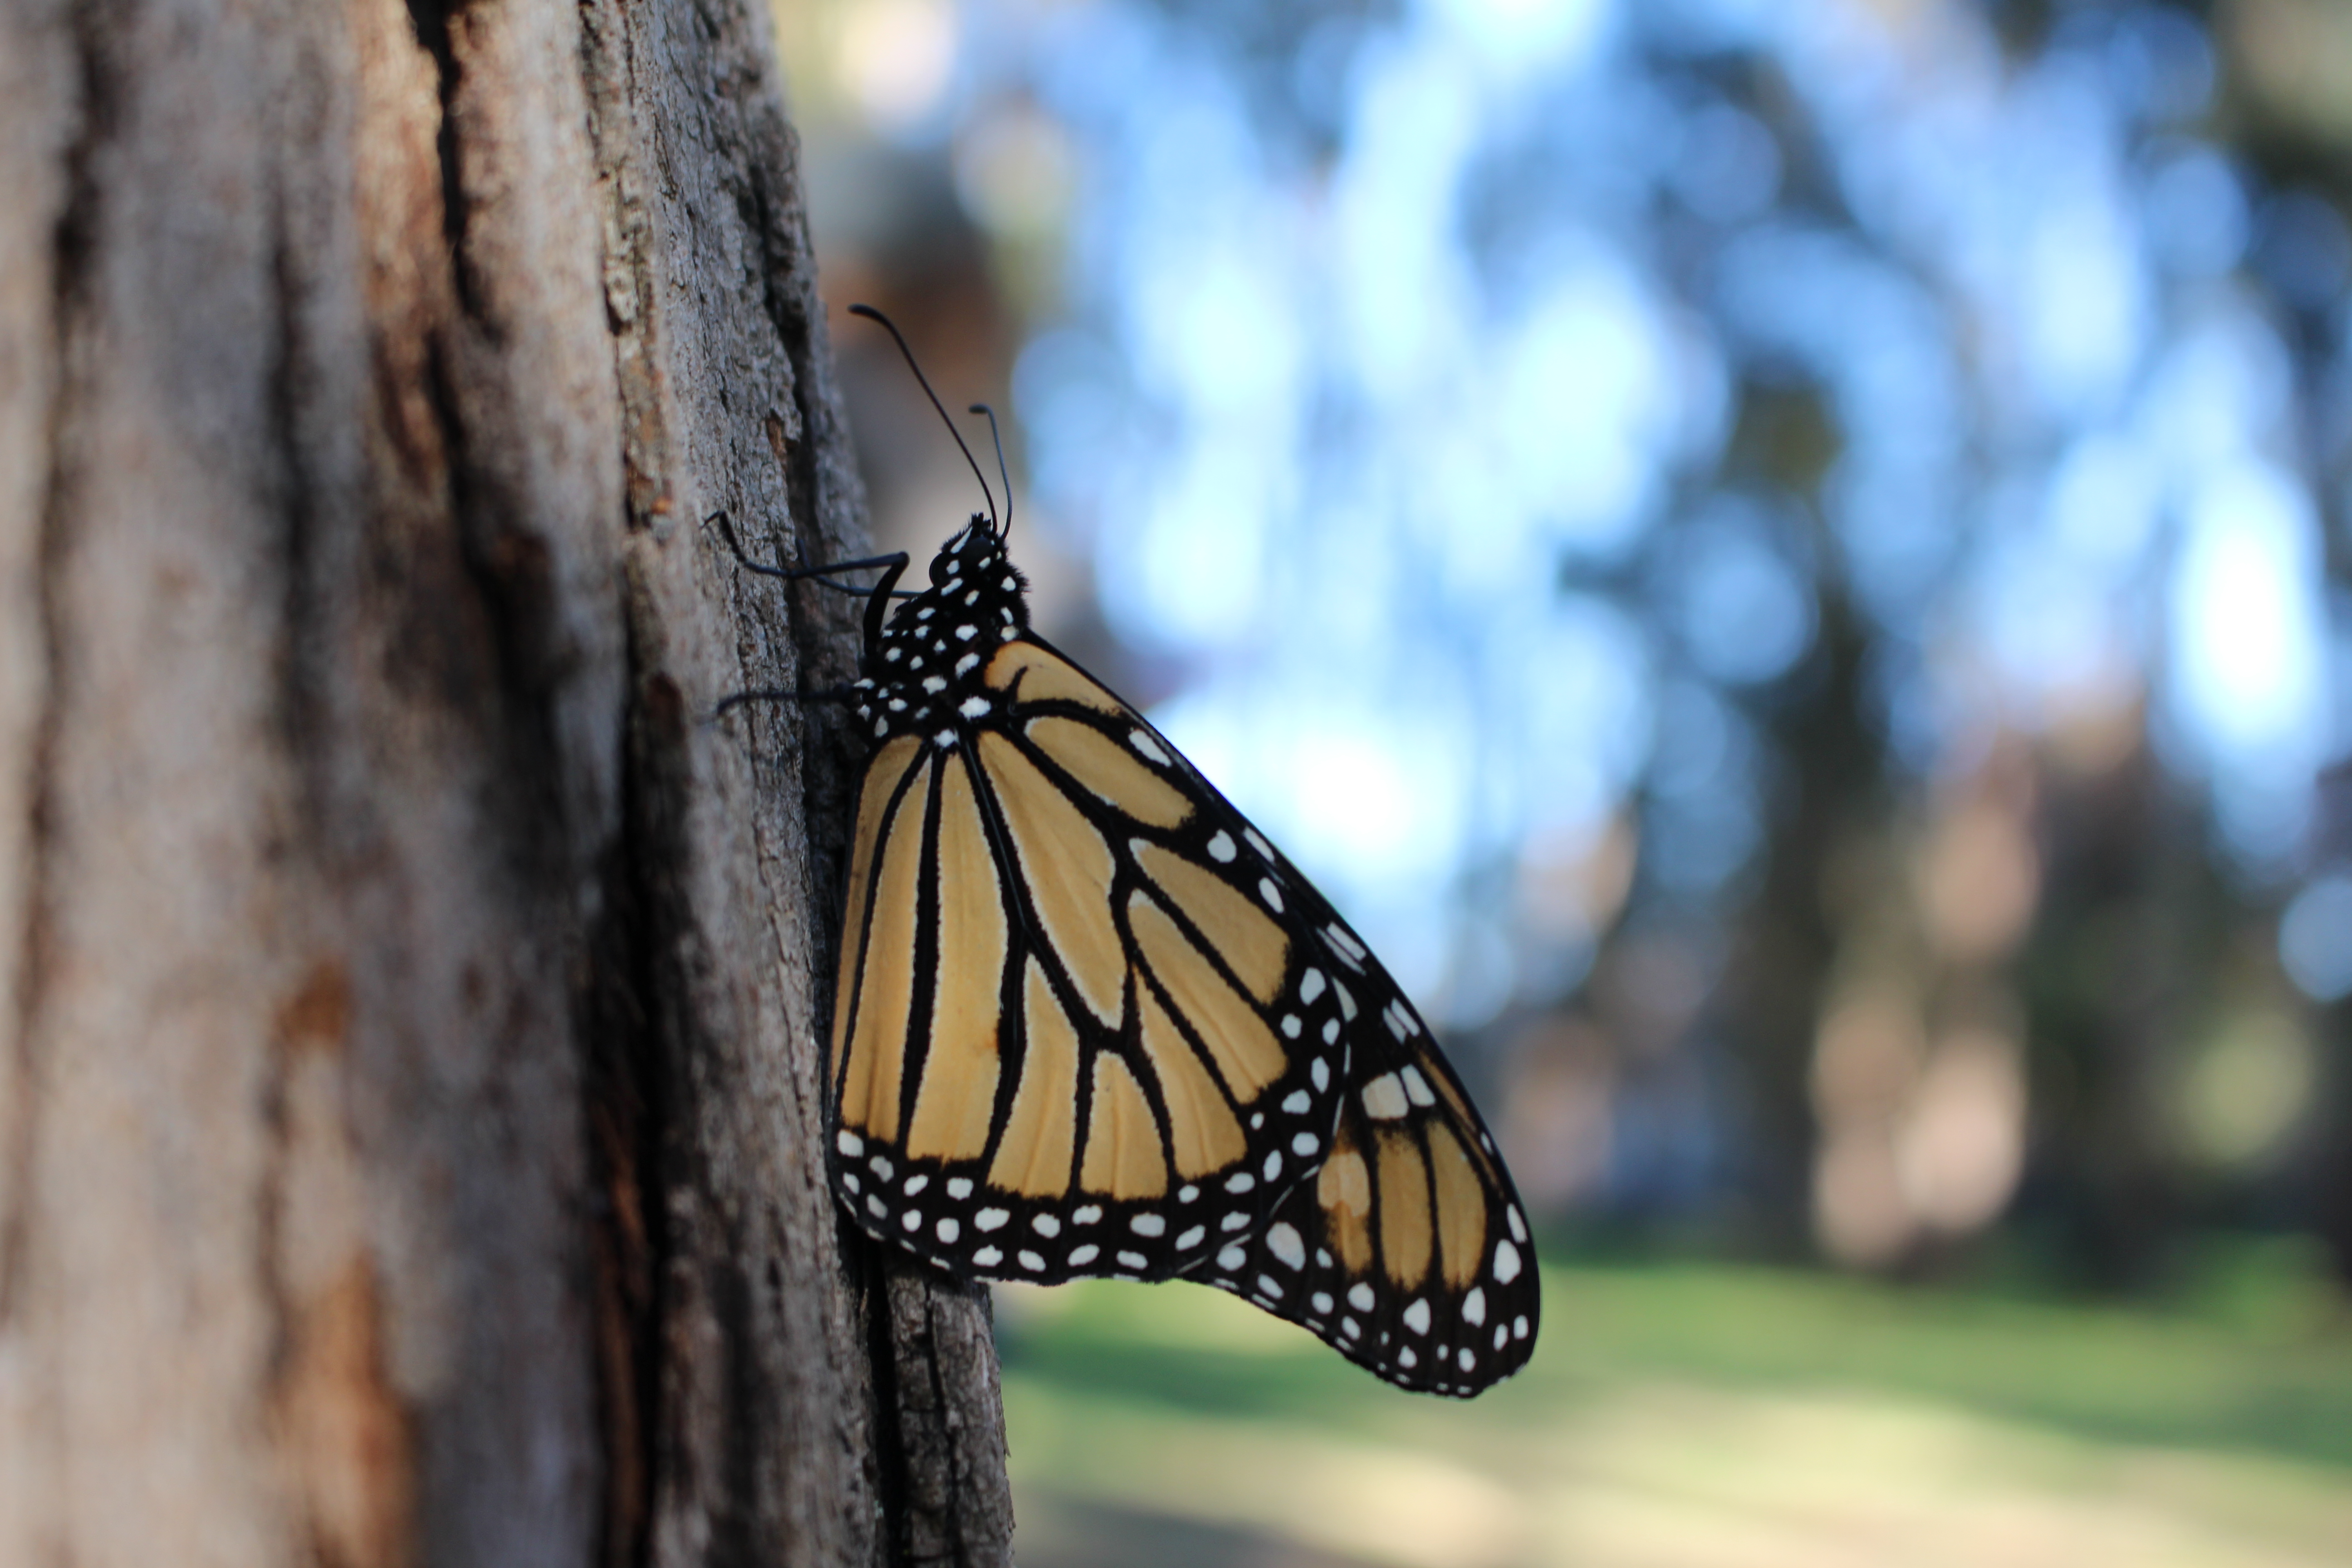 A monarch clings to a tree trunk in this dimly-lit scene.